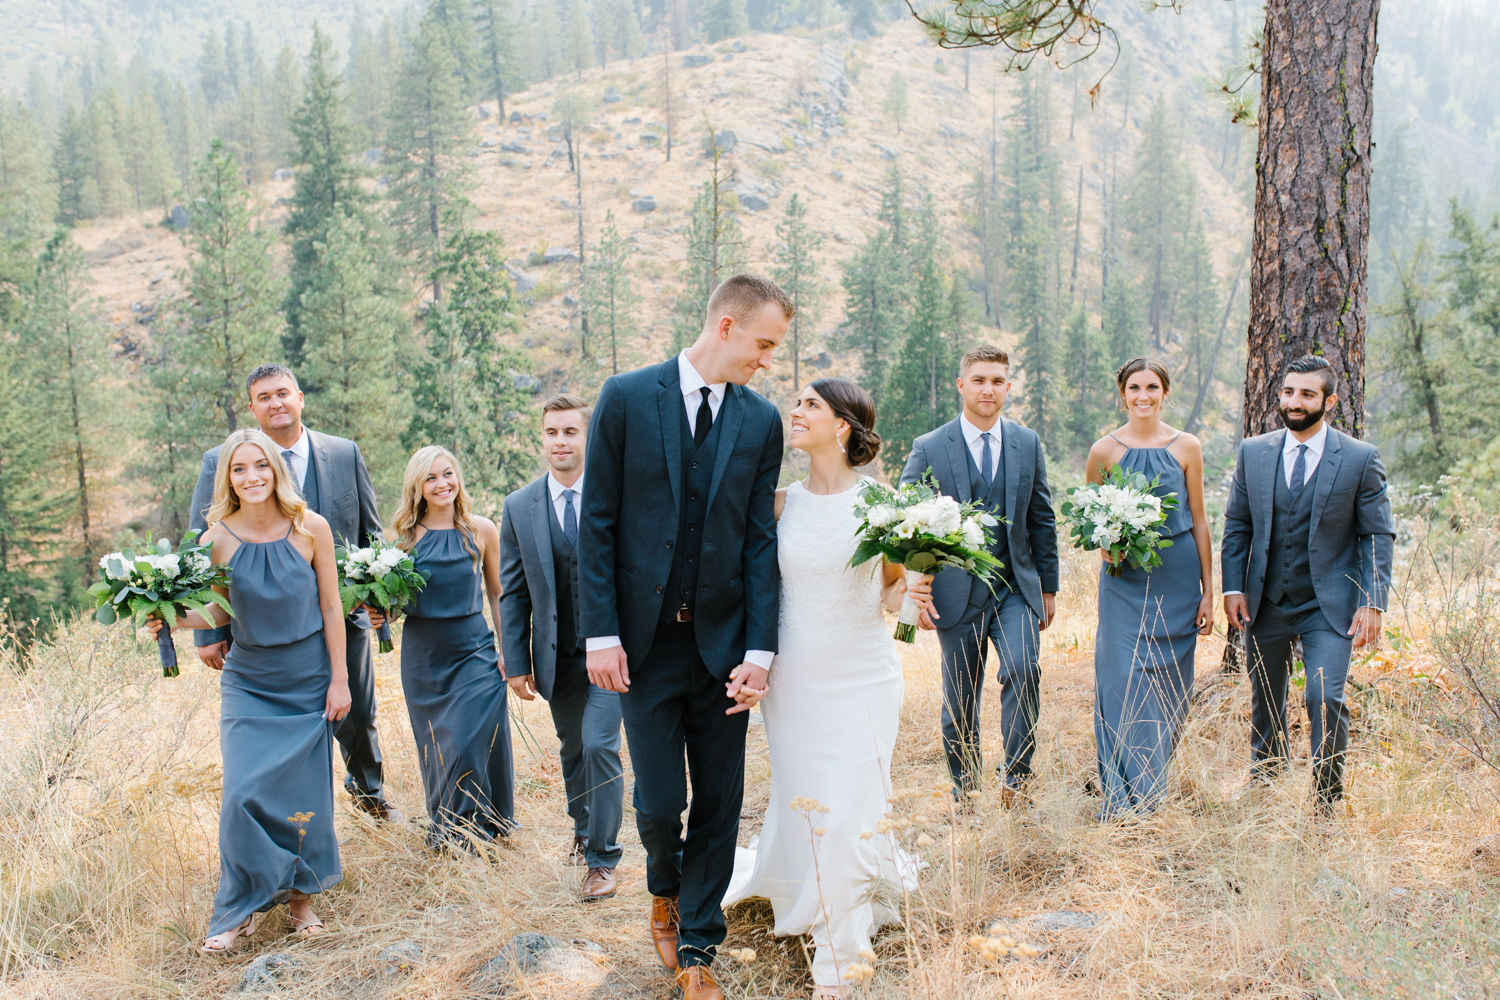 Grey and White Wedding in the Mountains of Leavenworth, Washington | Sleeping Lady | Classic and Timeless Wedding | VSCO | Bridal Party Portraits on a Mountain.jpg-2690.jpg